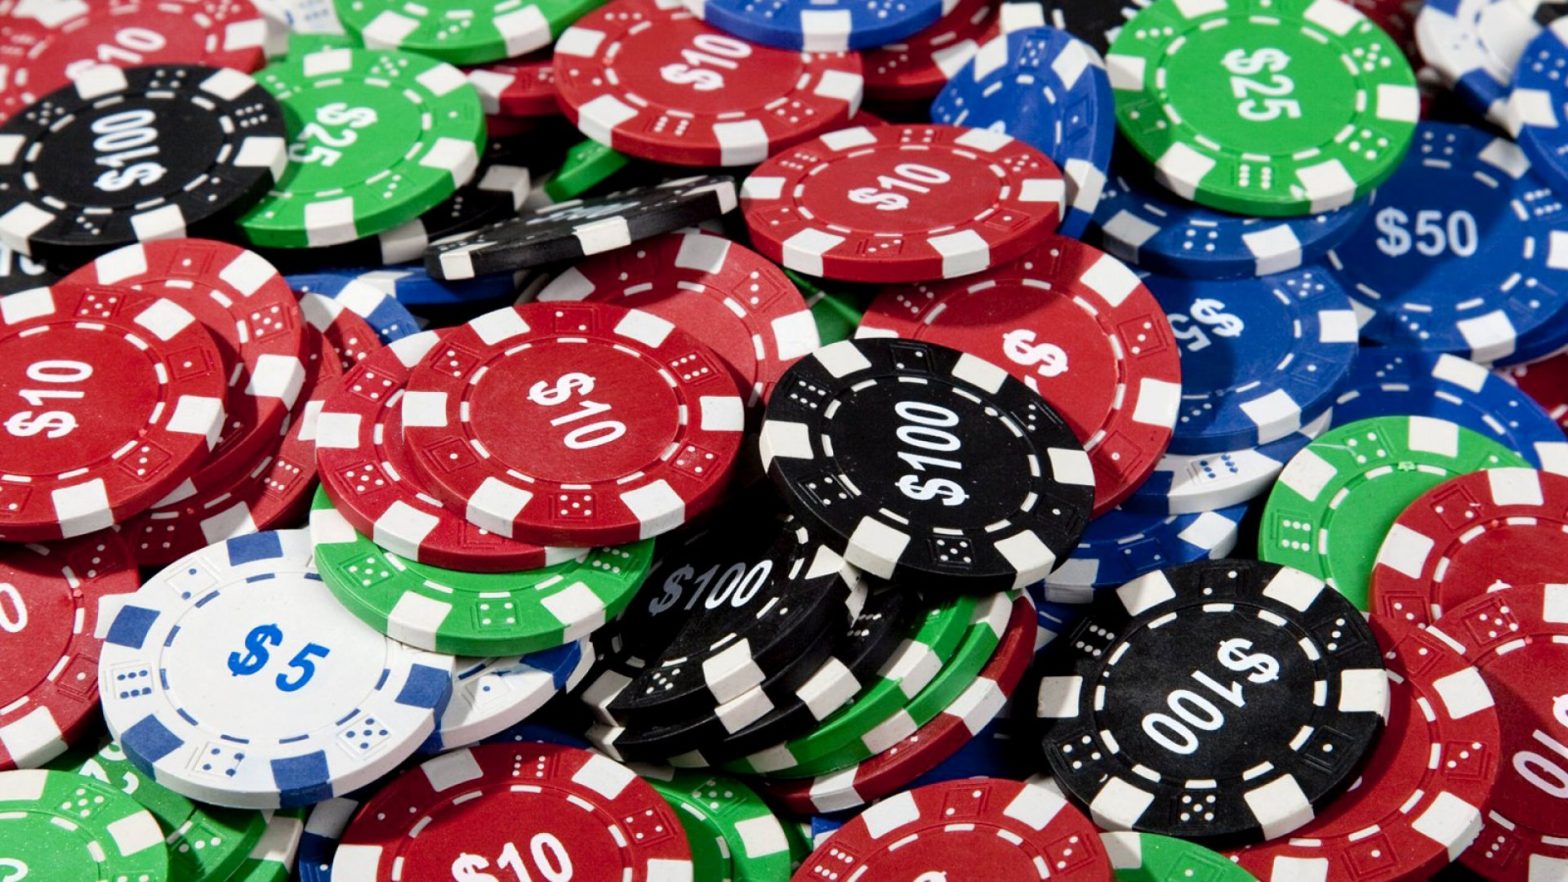 Web based vs software-based casinos: Which one is better?